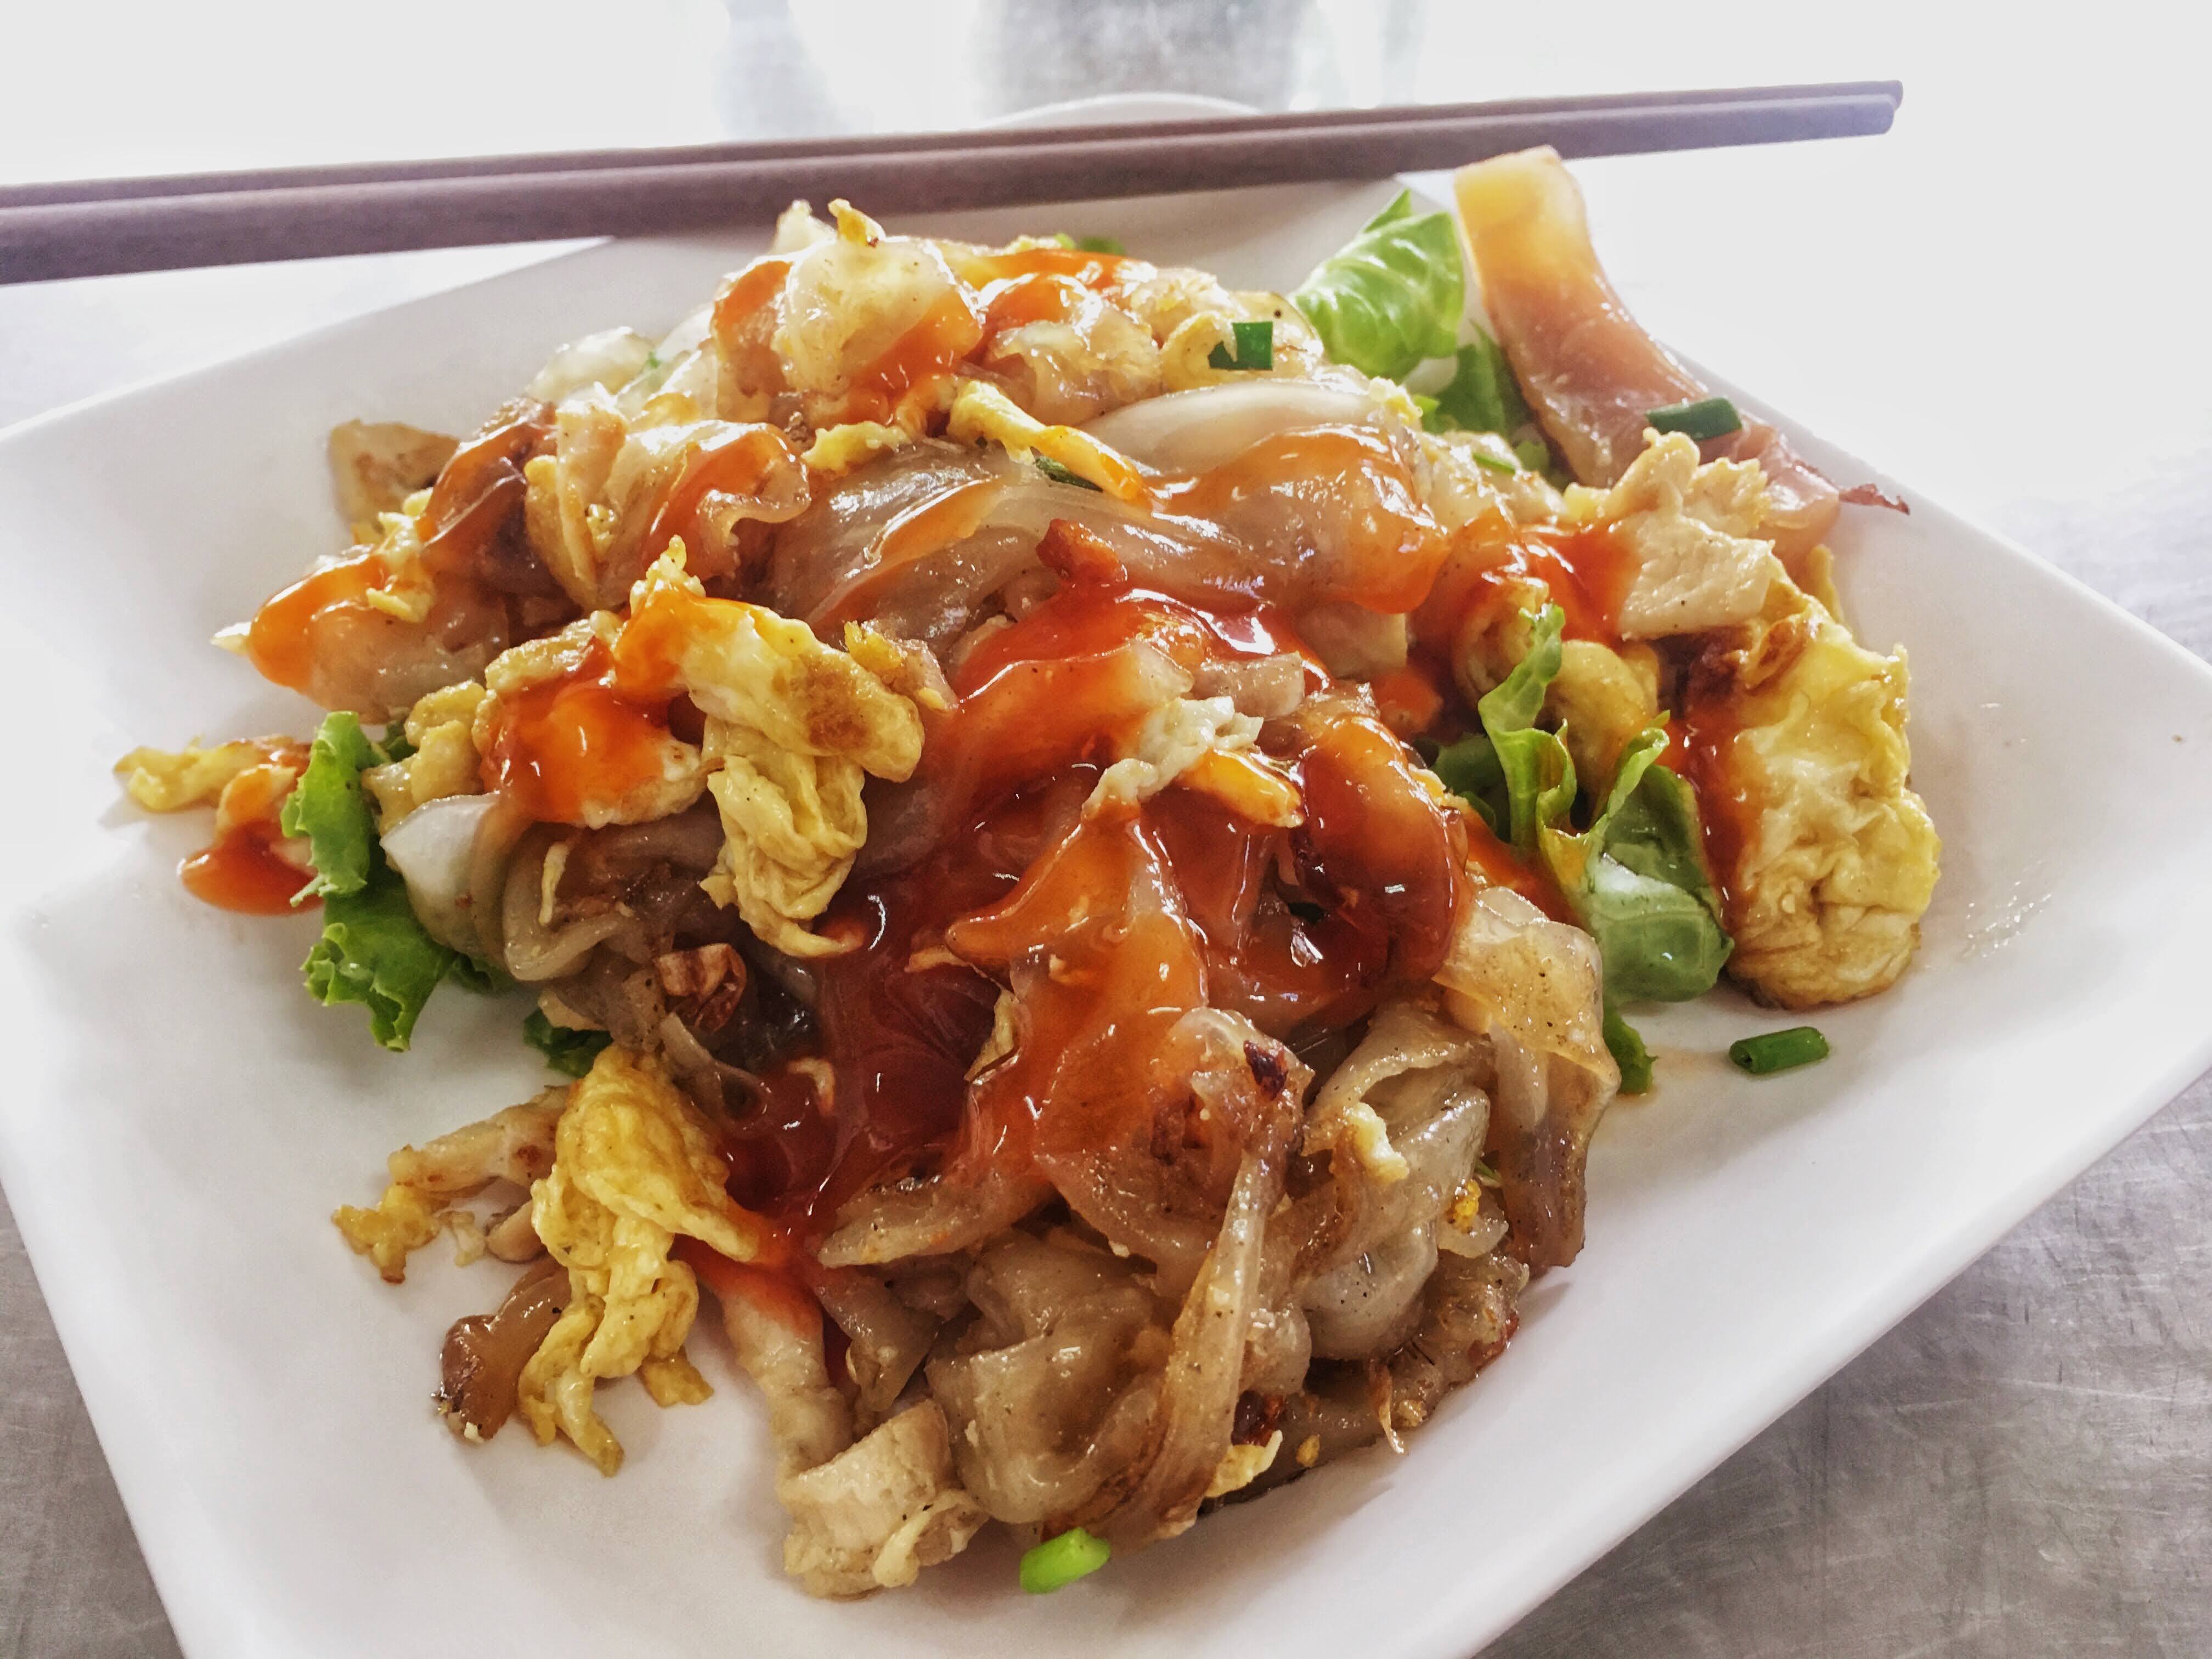 Pad Si Ew, or Thai Stir-Fried Noodles with Chicken